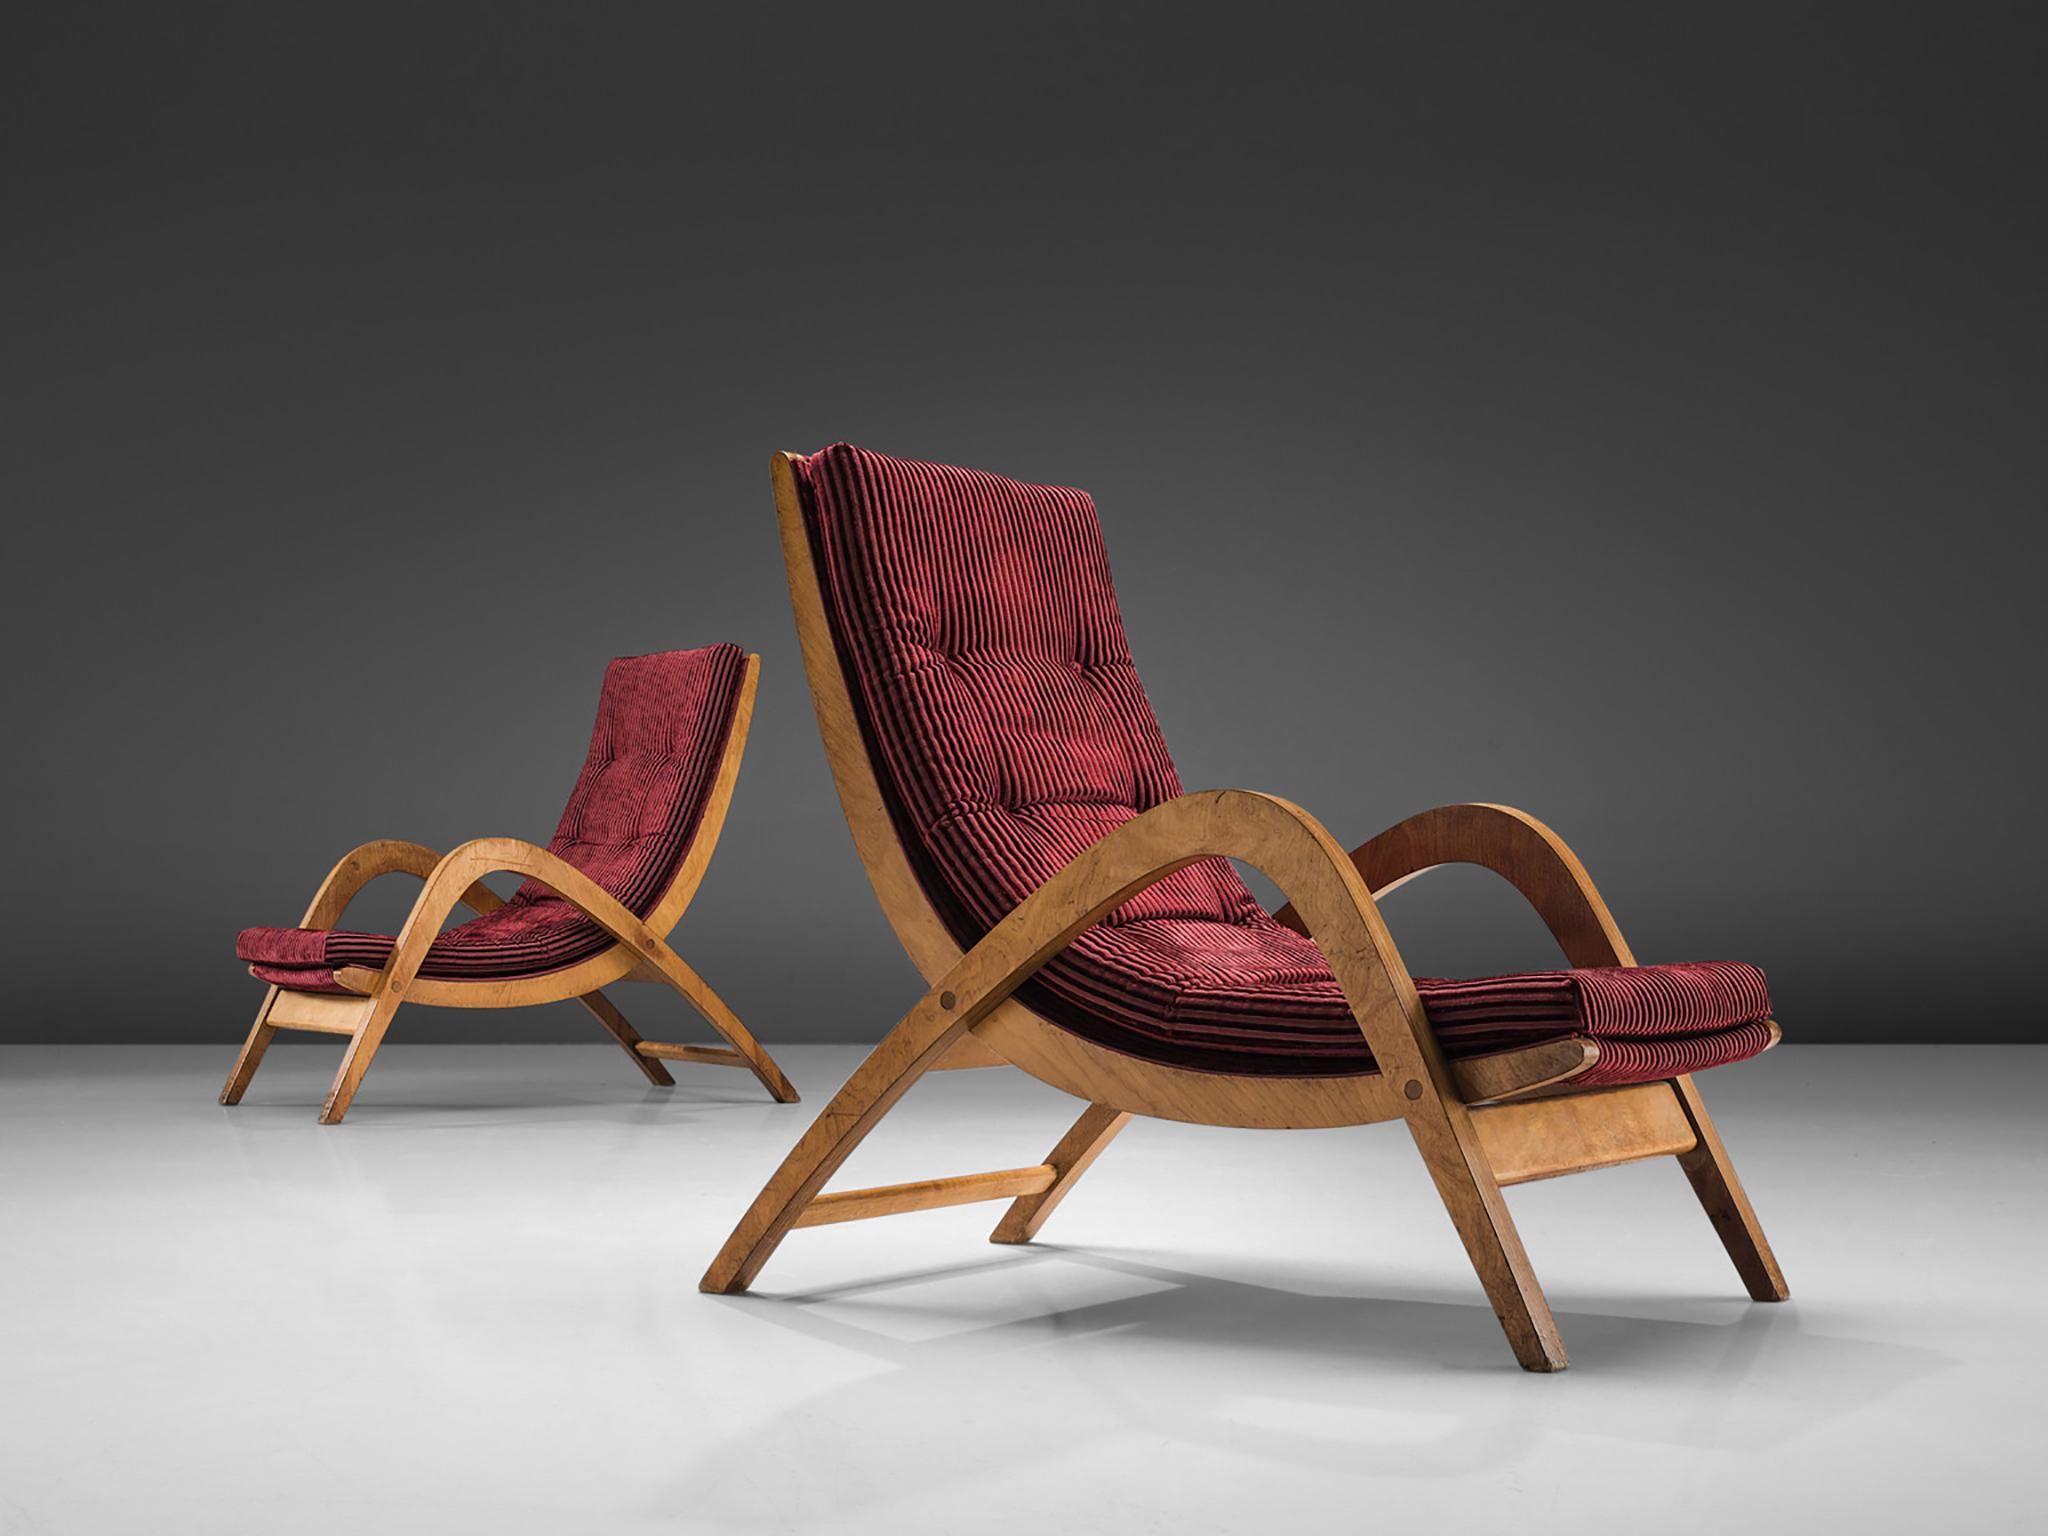 Neil Morris for H. Morris, lounge chairs, burgundy red upholstery and plywood, Scotland, 1940s. 

These wavy, elegant armchairs have both a high back and high armrests and together create the high character of these very large lounge chairs. The